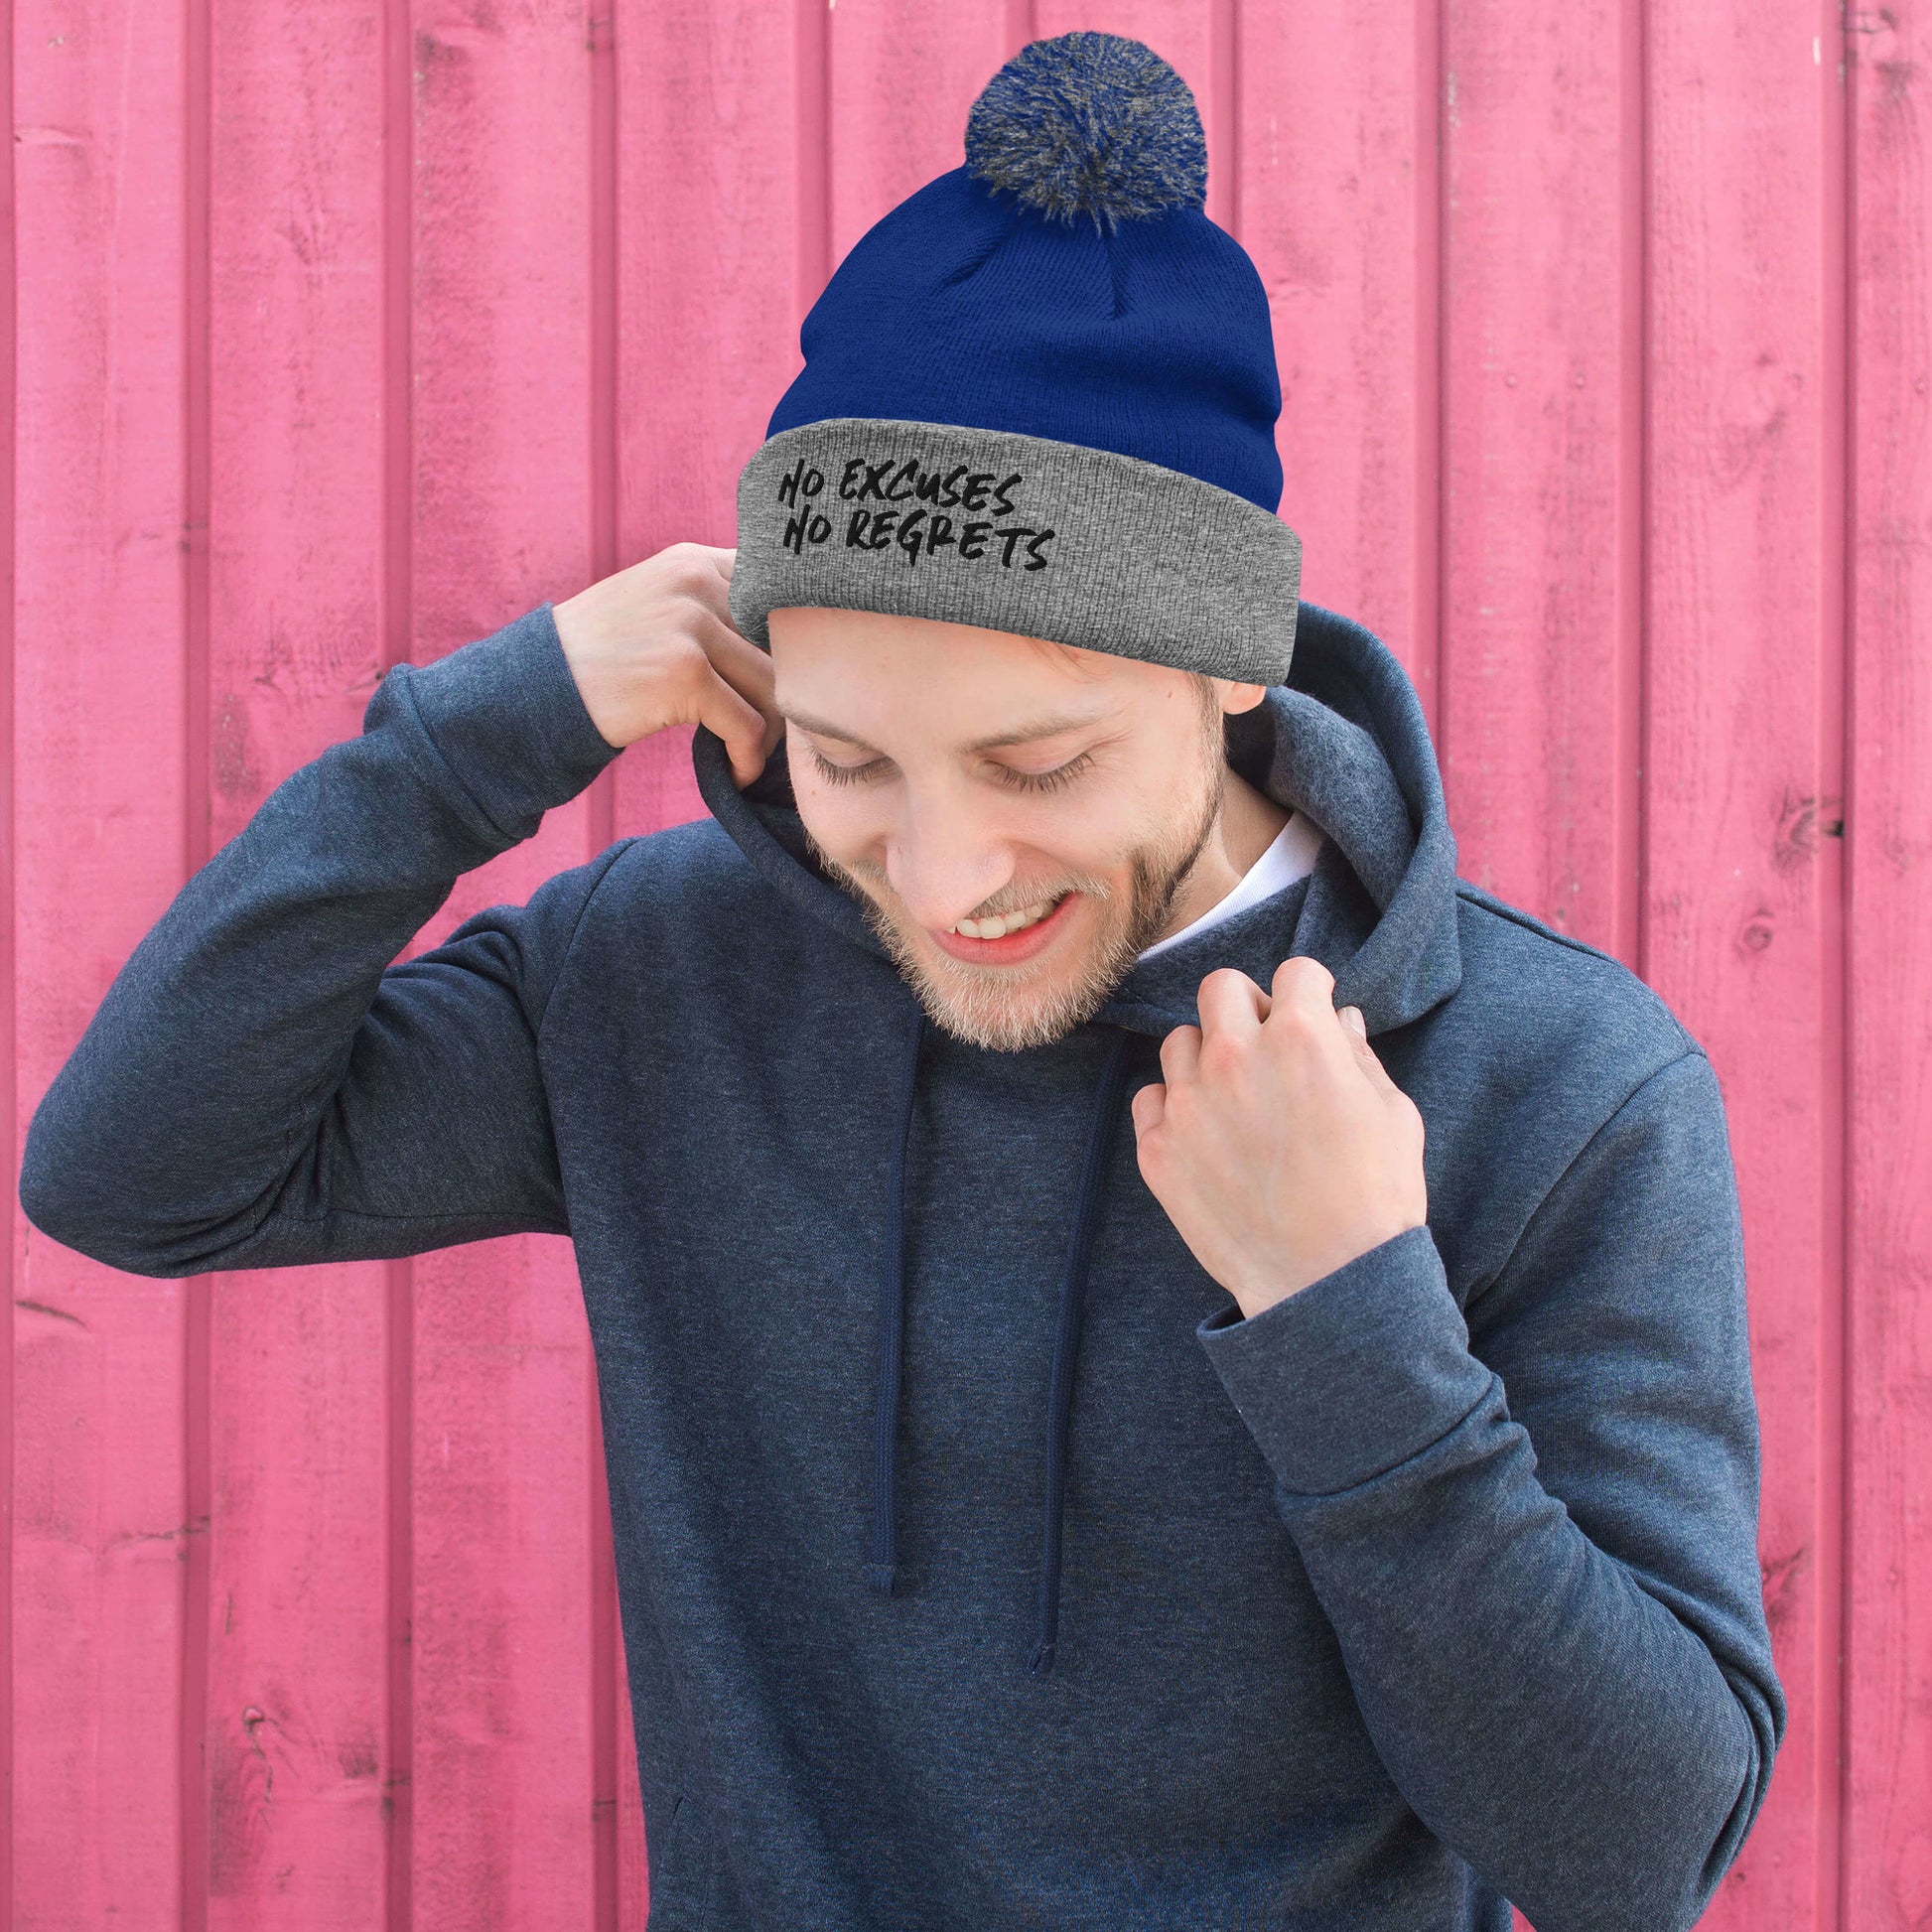 NO EXCUSES NO REGRETS ~ NENR EMBROIDERED BEANIE